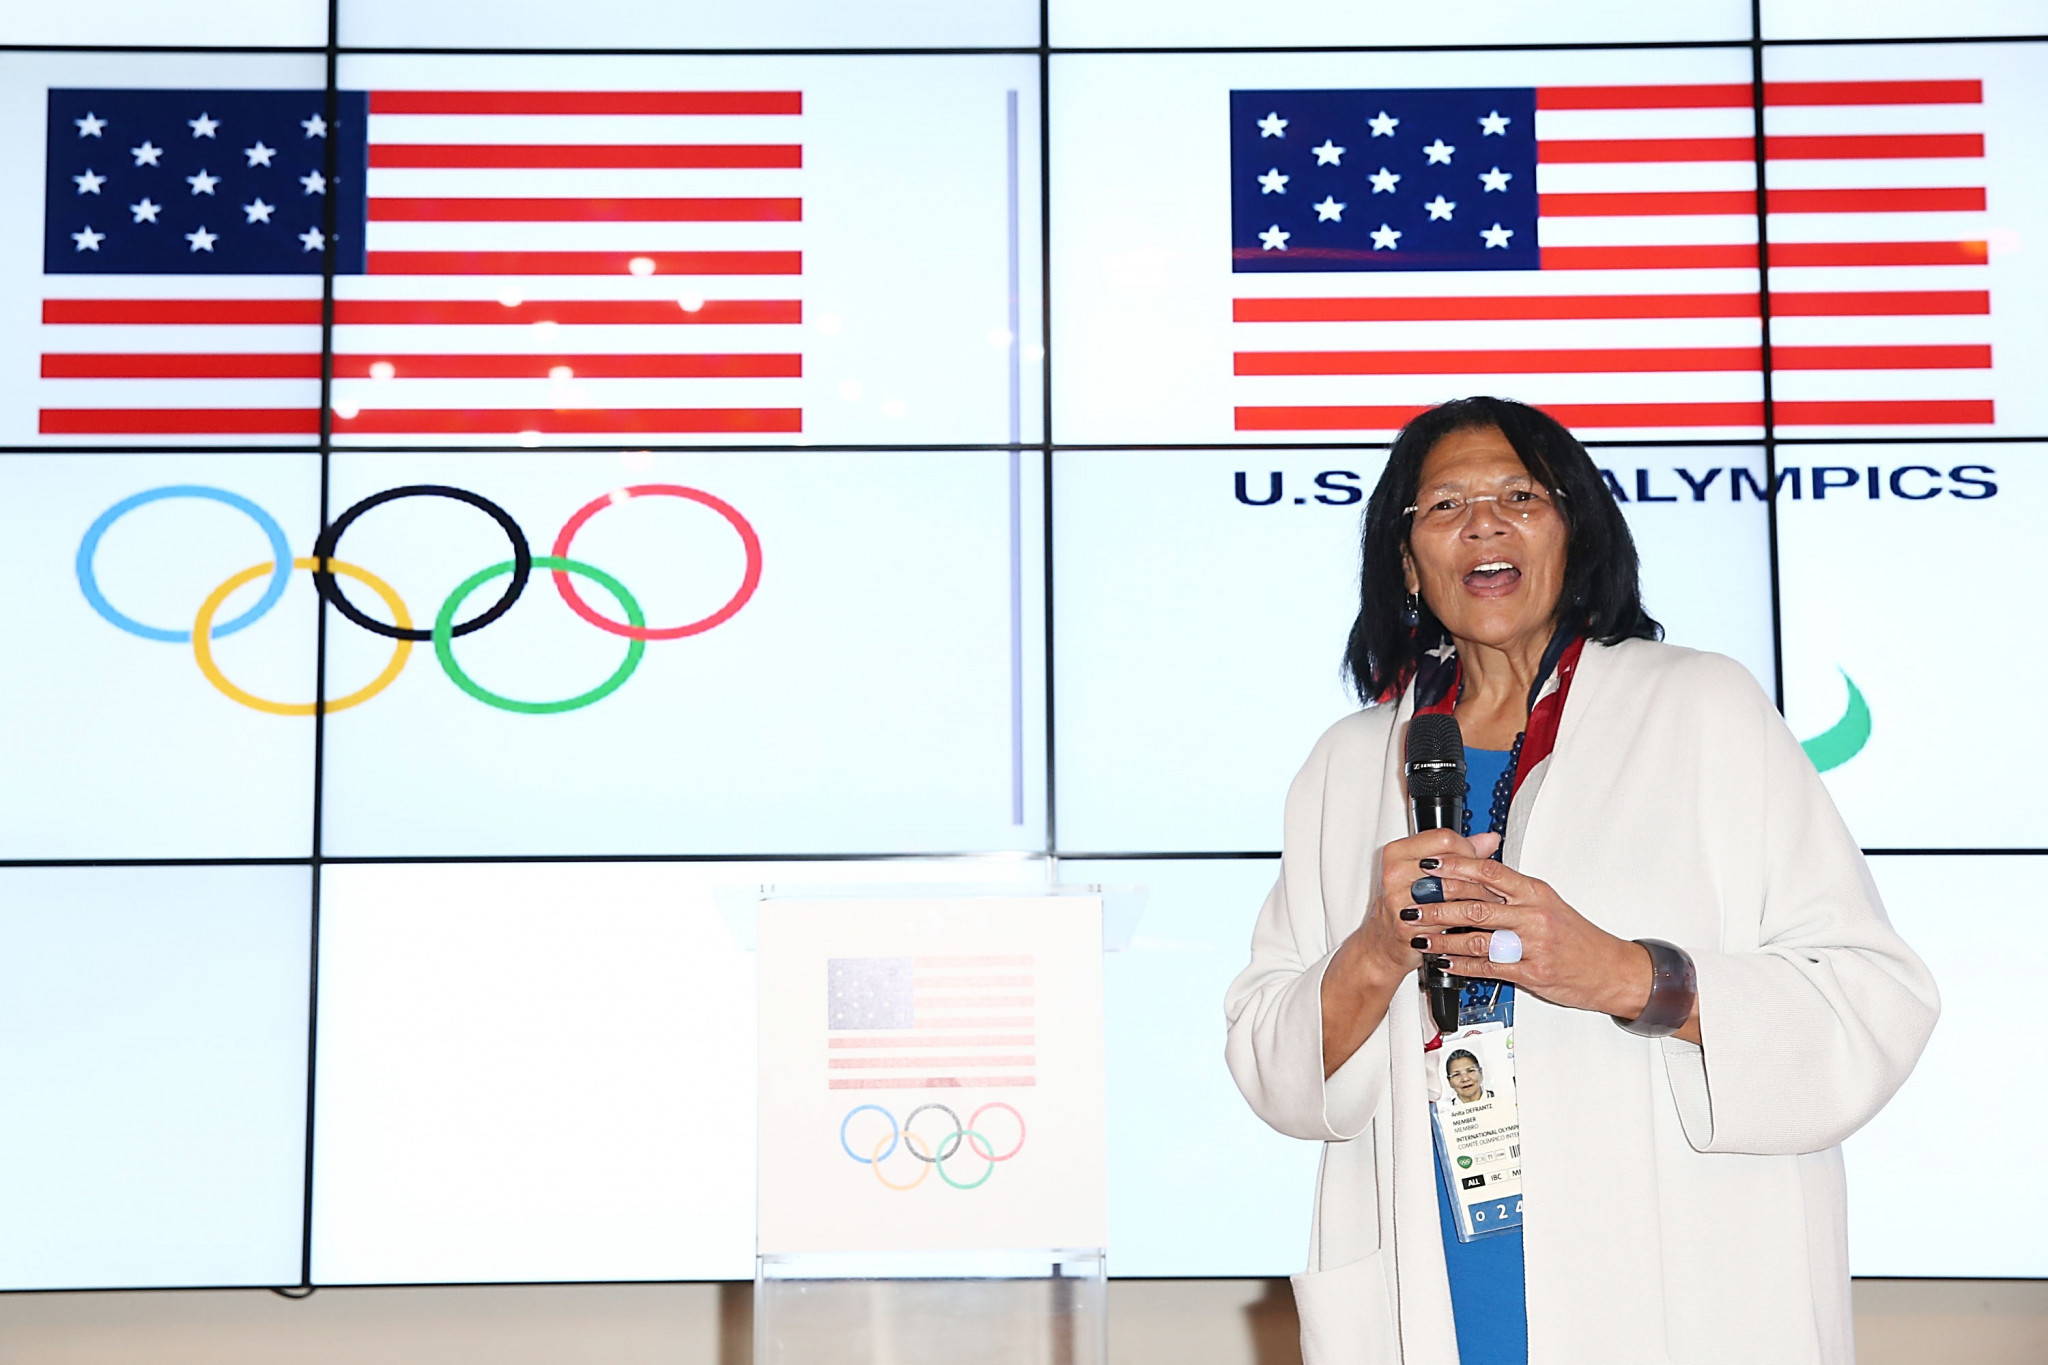 America's Anita DeFrantz is also expected to stand for vice-president during the IOC Session ©Getty Images